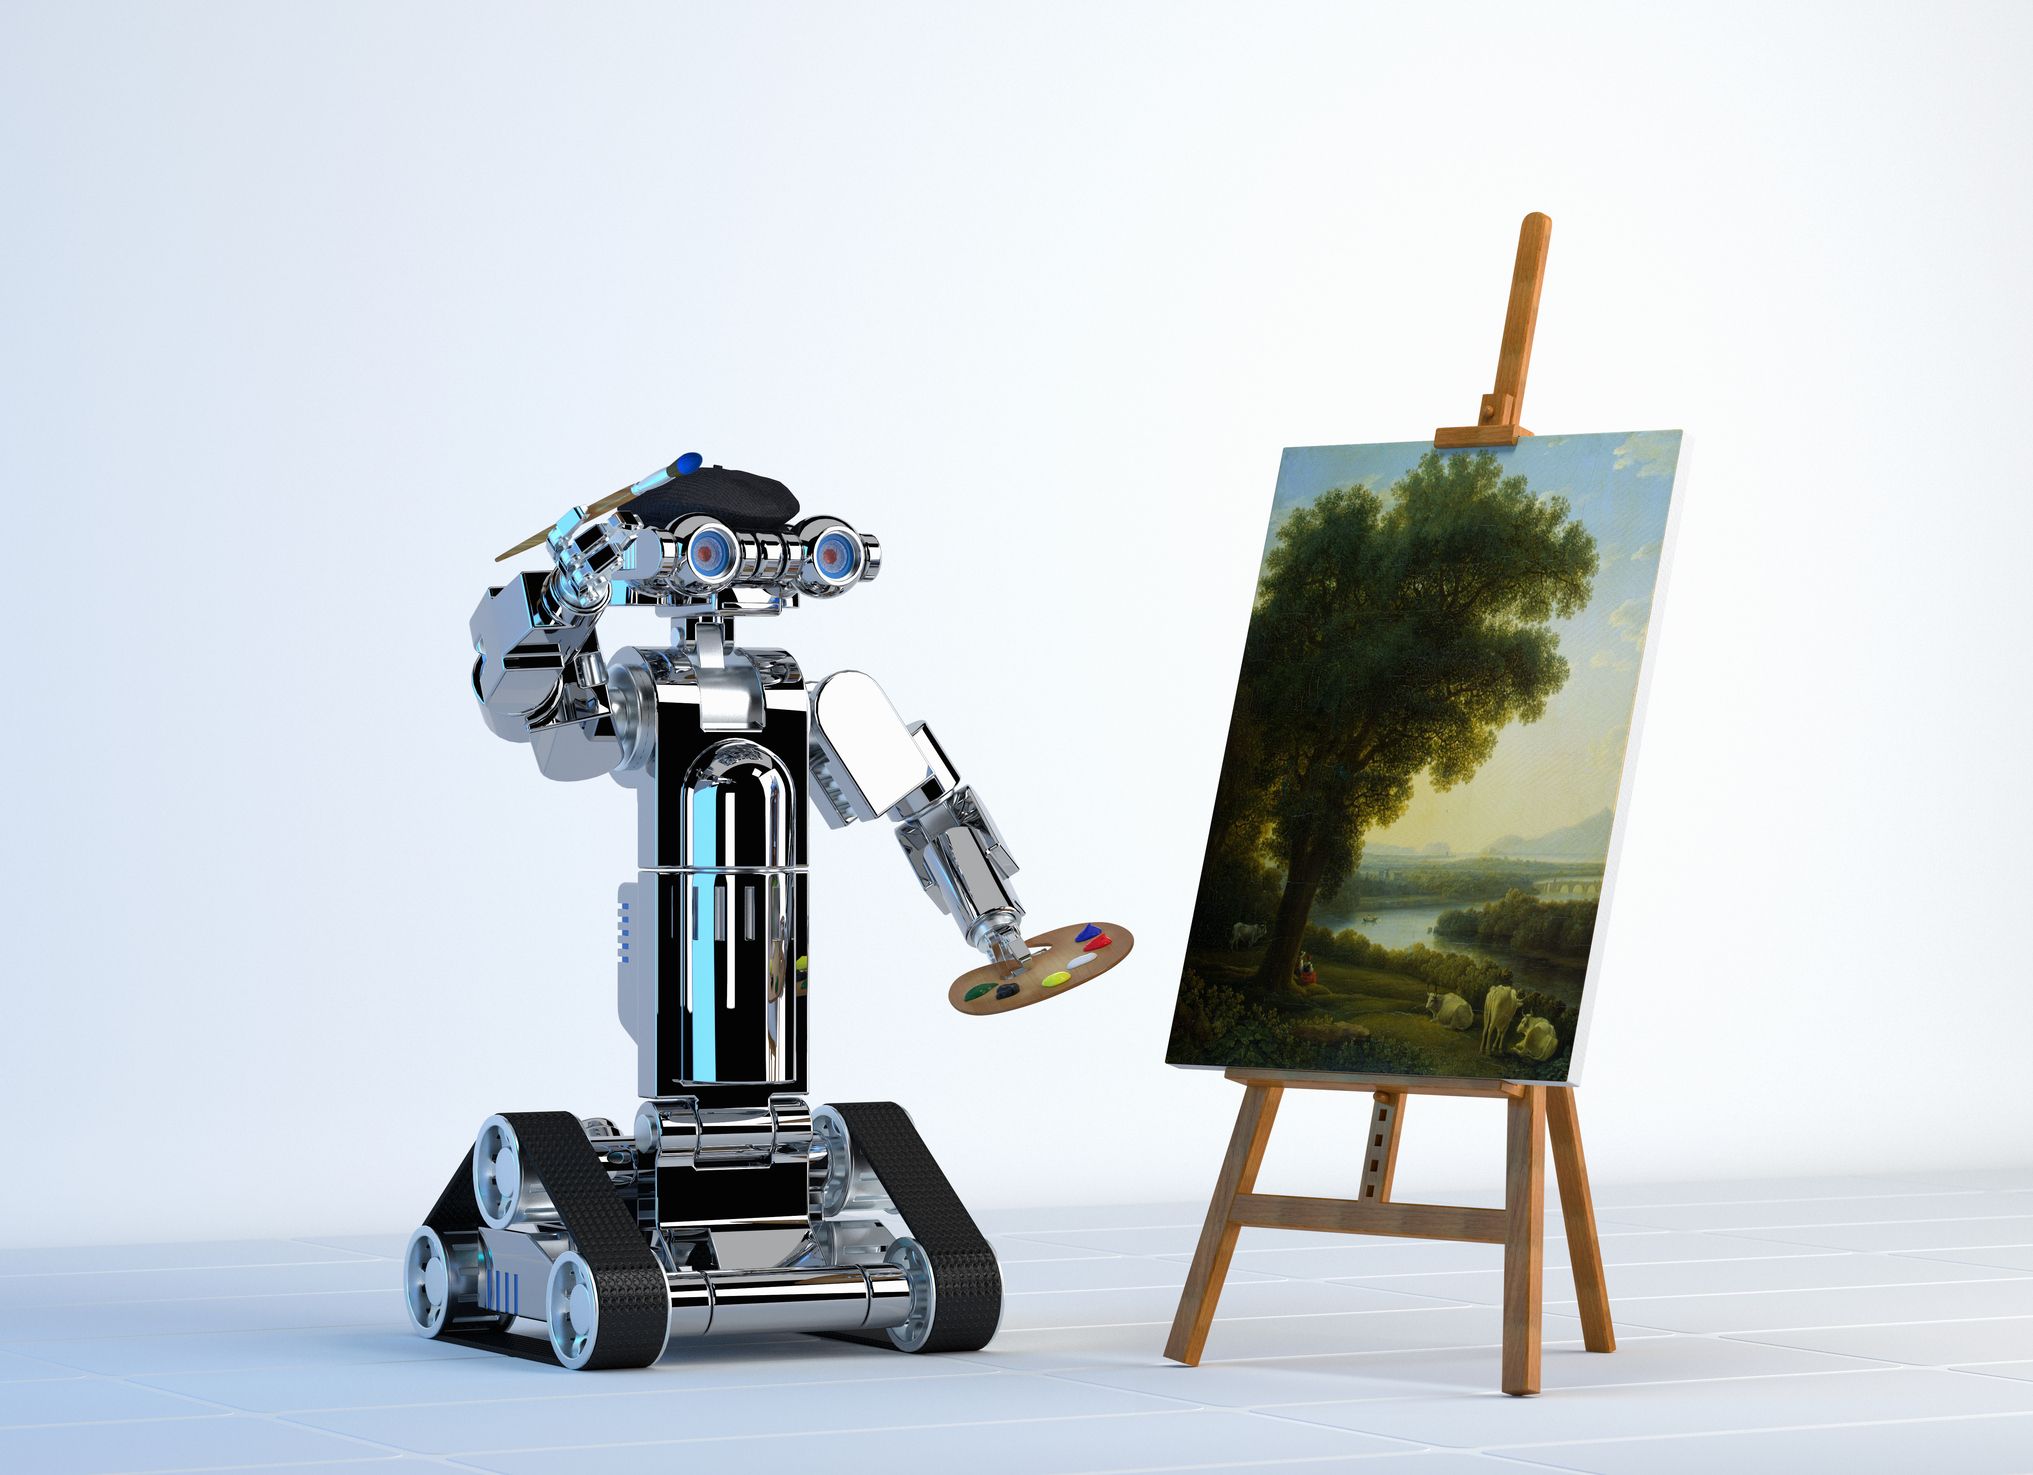 How Machines Are Taking Over Art